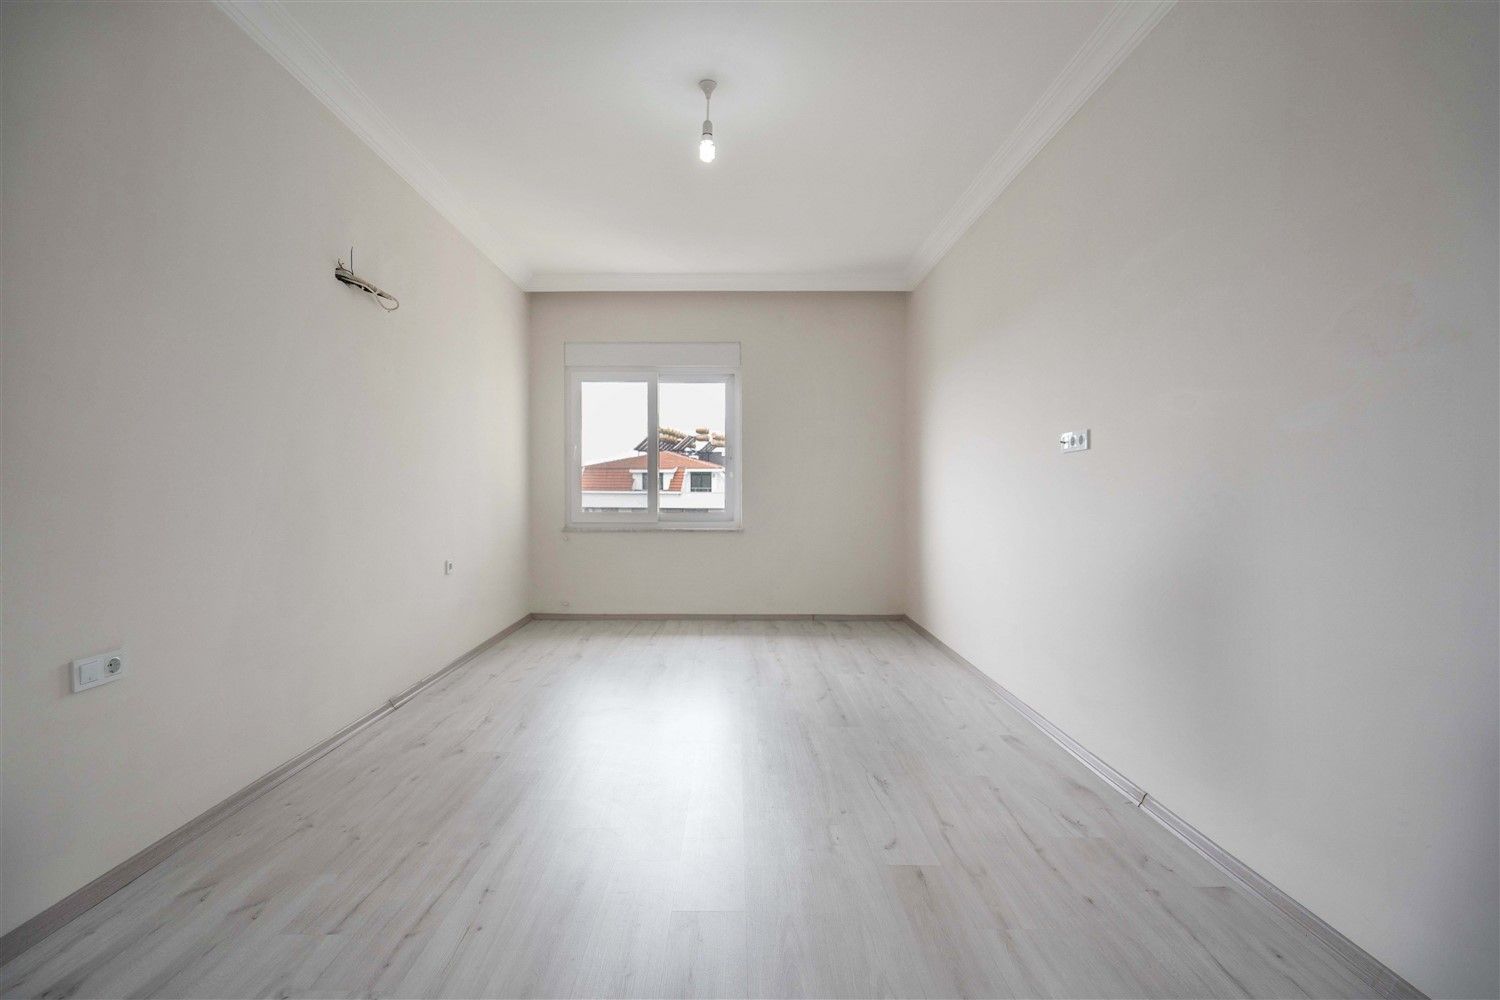 2 bedroom apartment with separate kitchen - Chiplakli district, Alanya